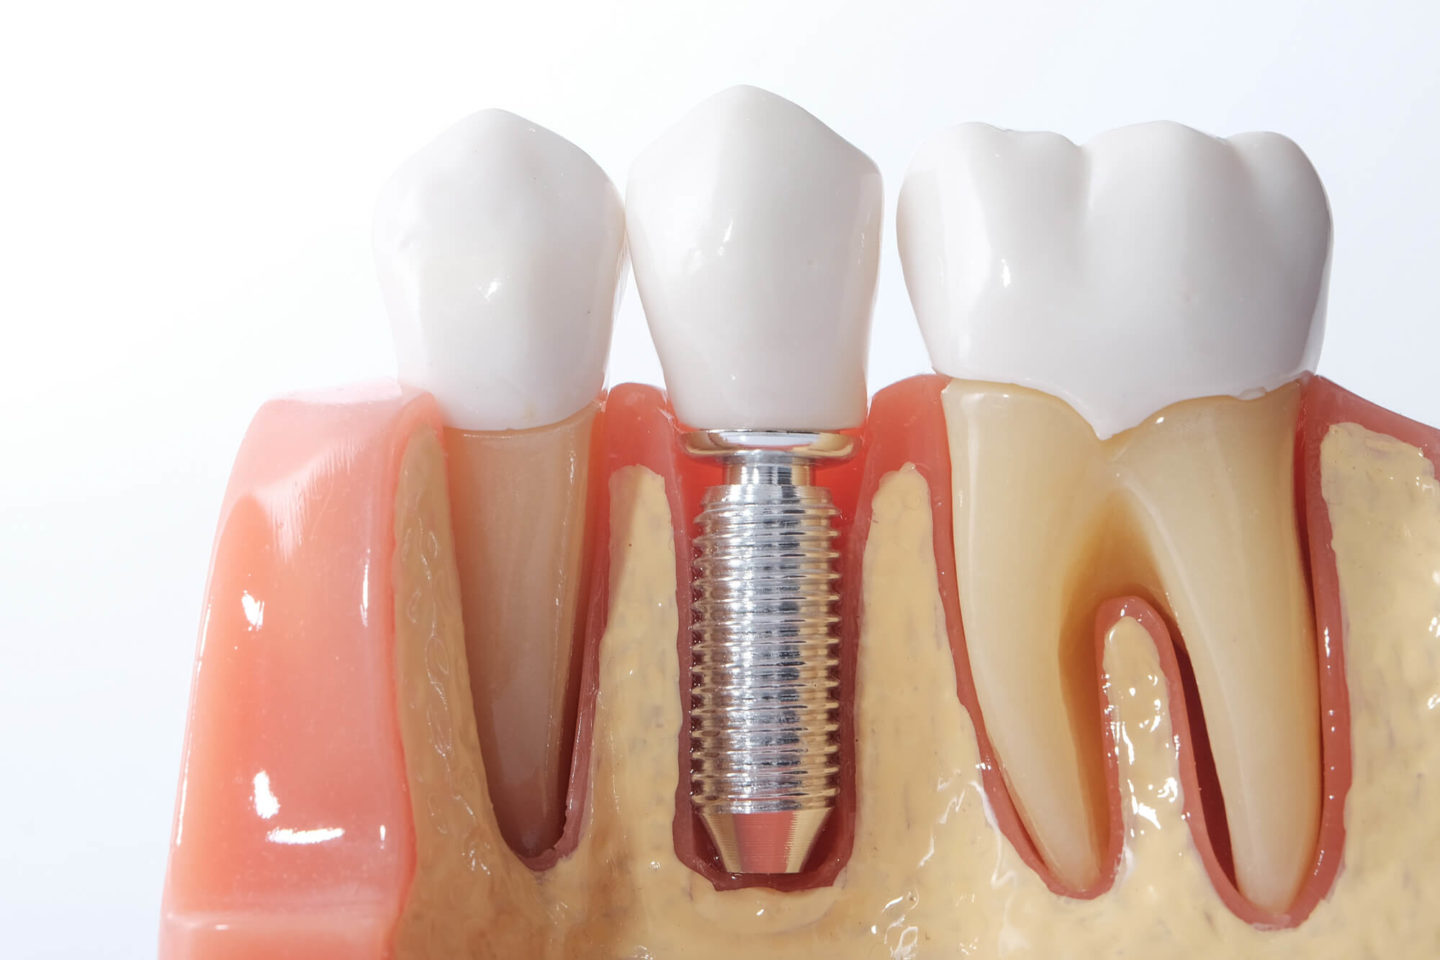 Are There Any Risks of Dental Implants? What to Expect from the Process